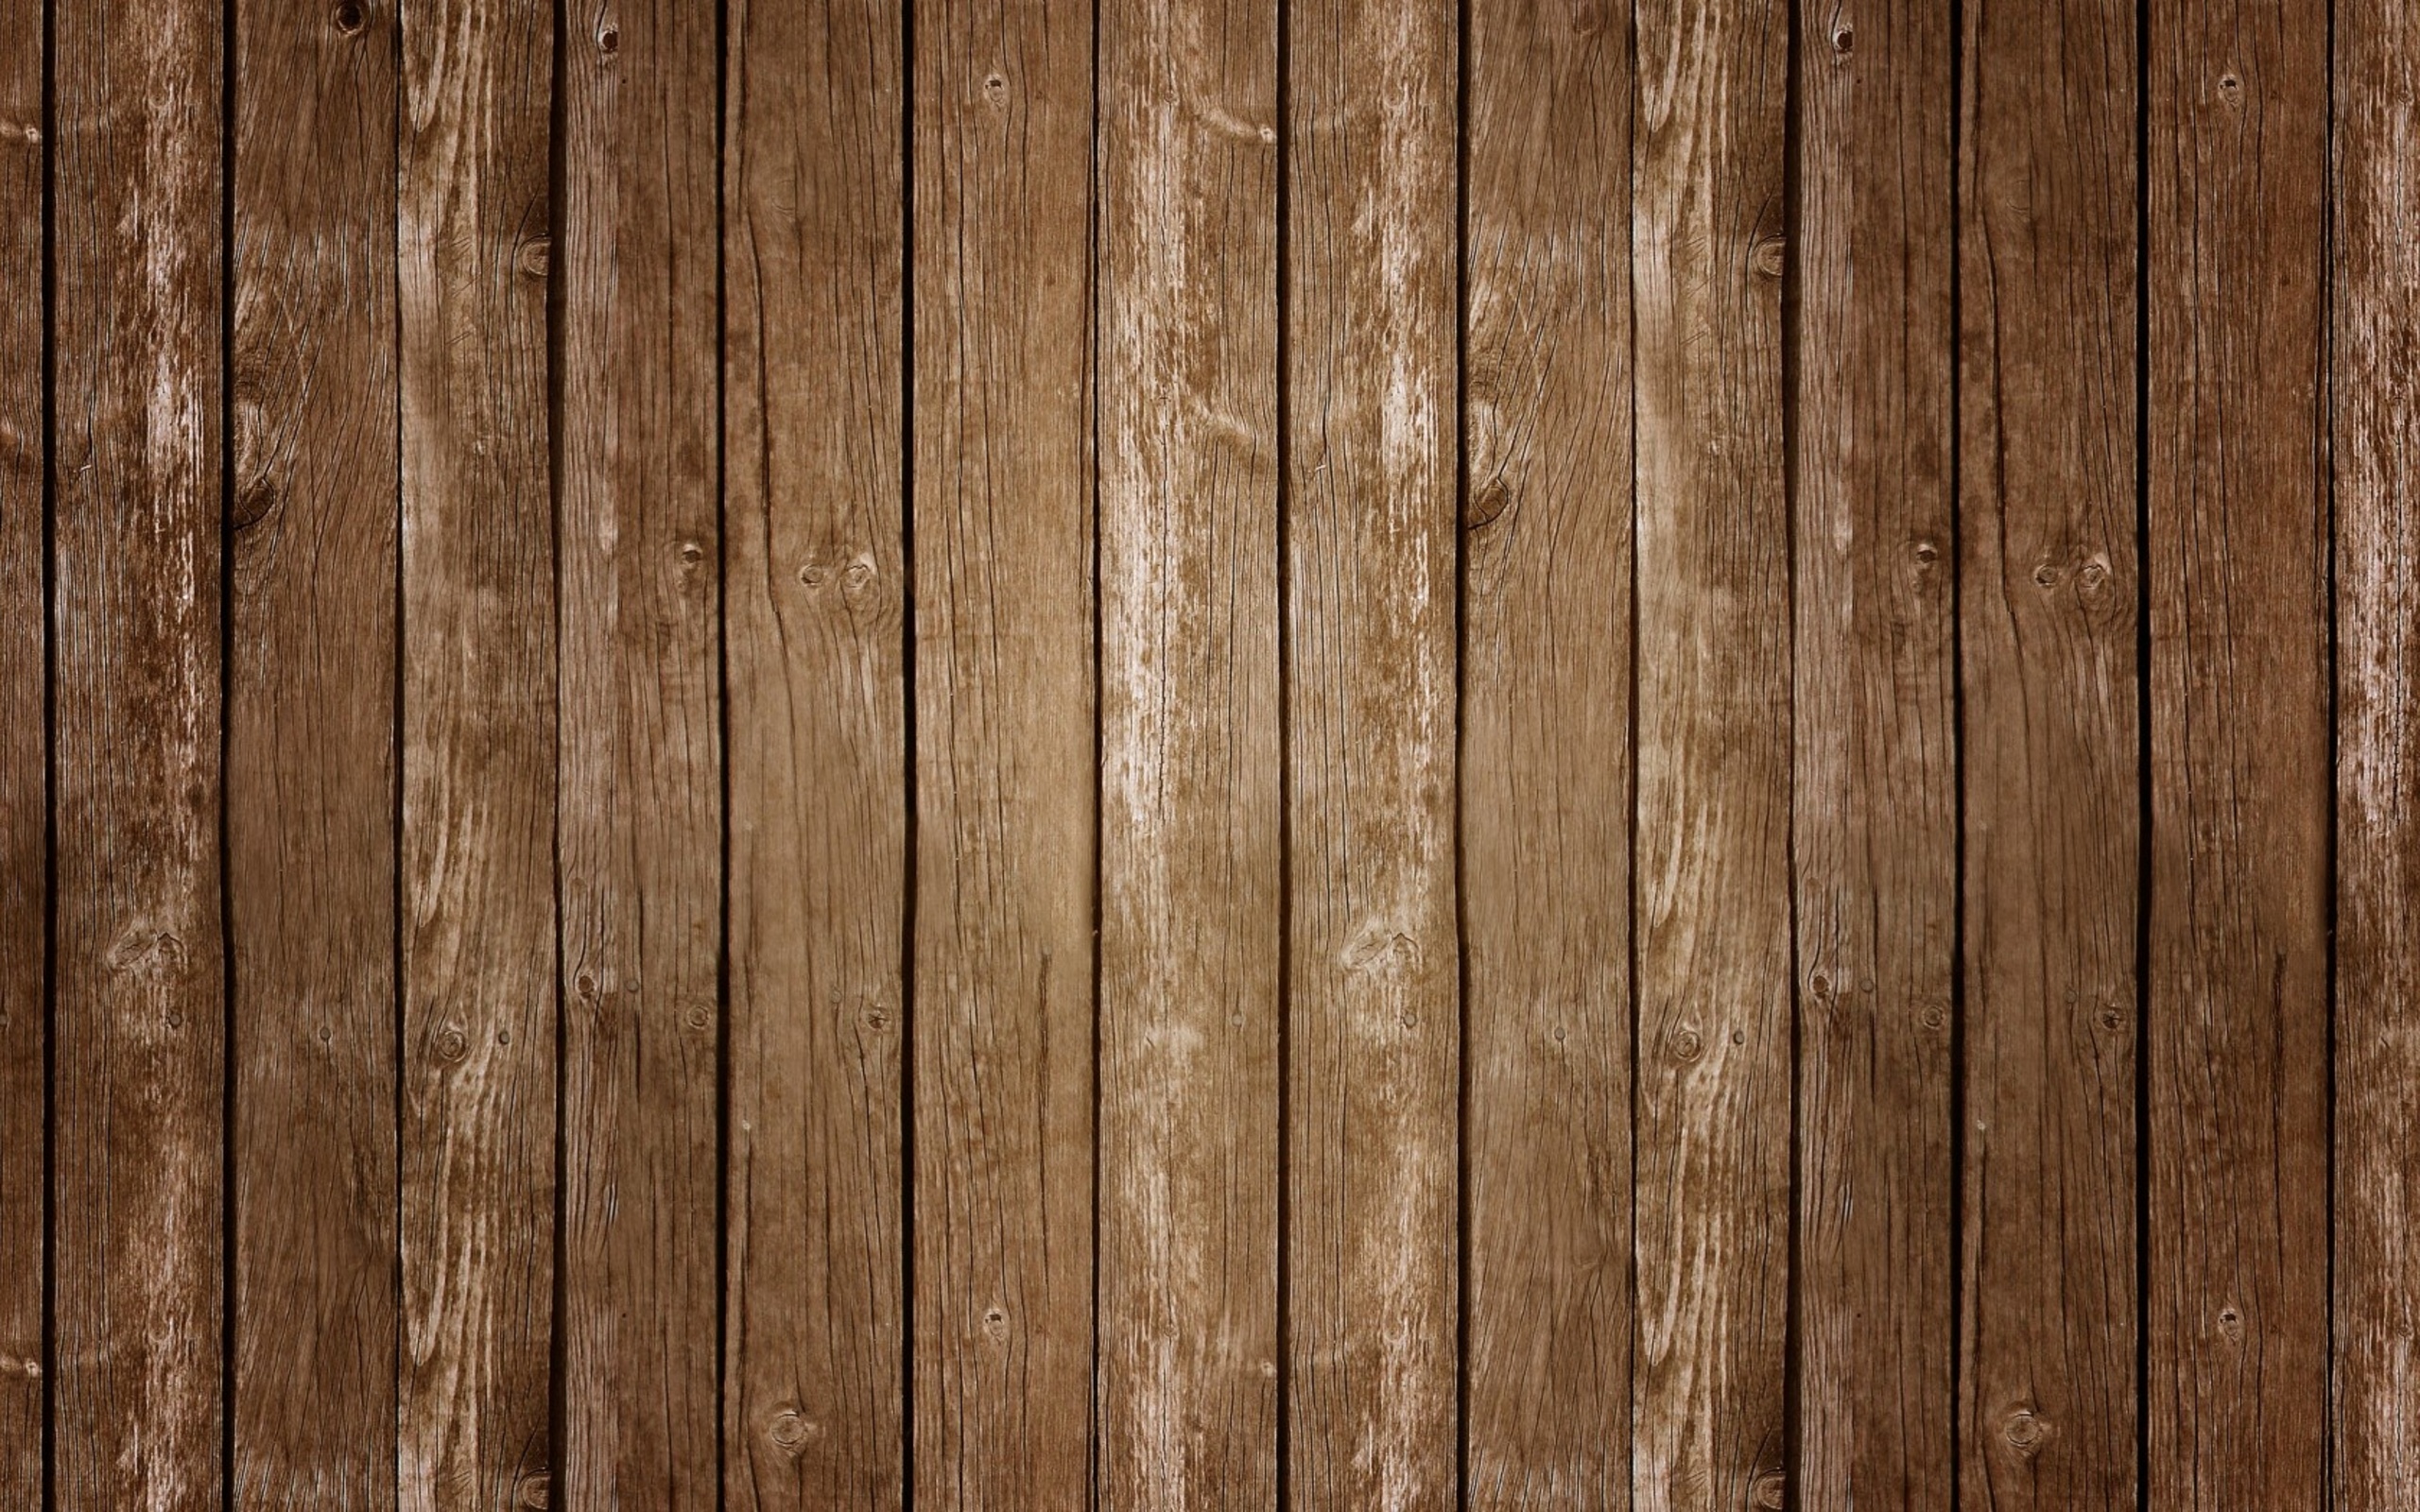 wood wallpaper for walls,wood,wood stain,plank,hardwood,brown